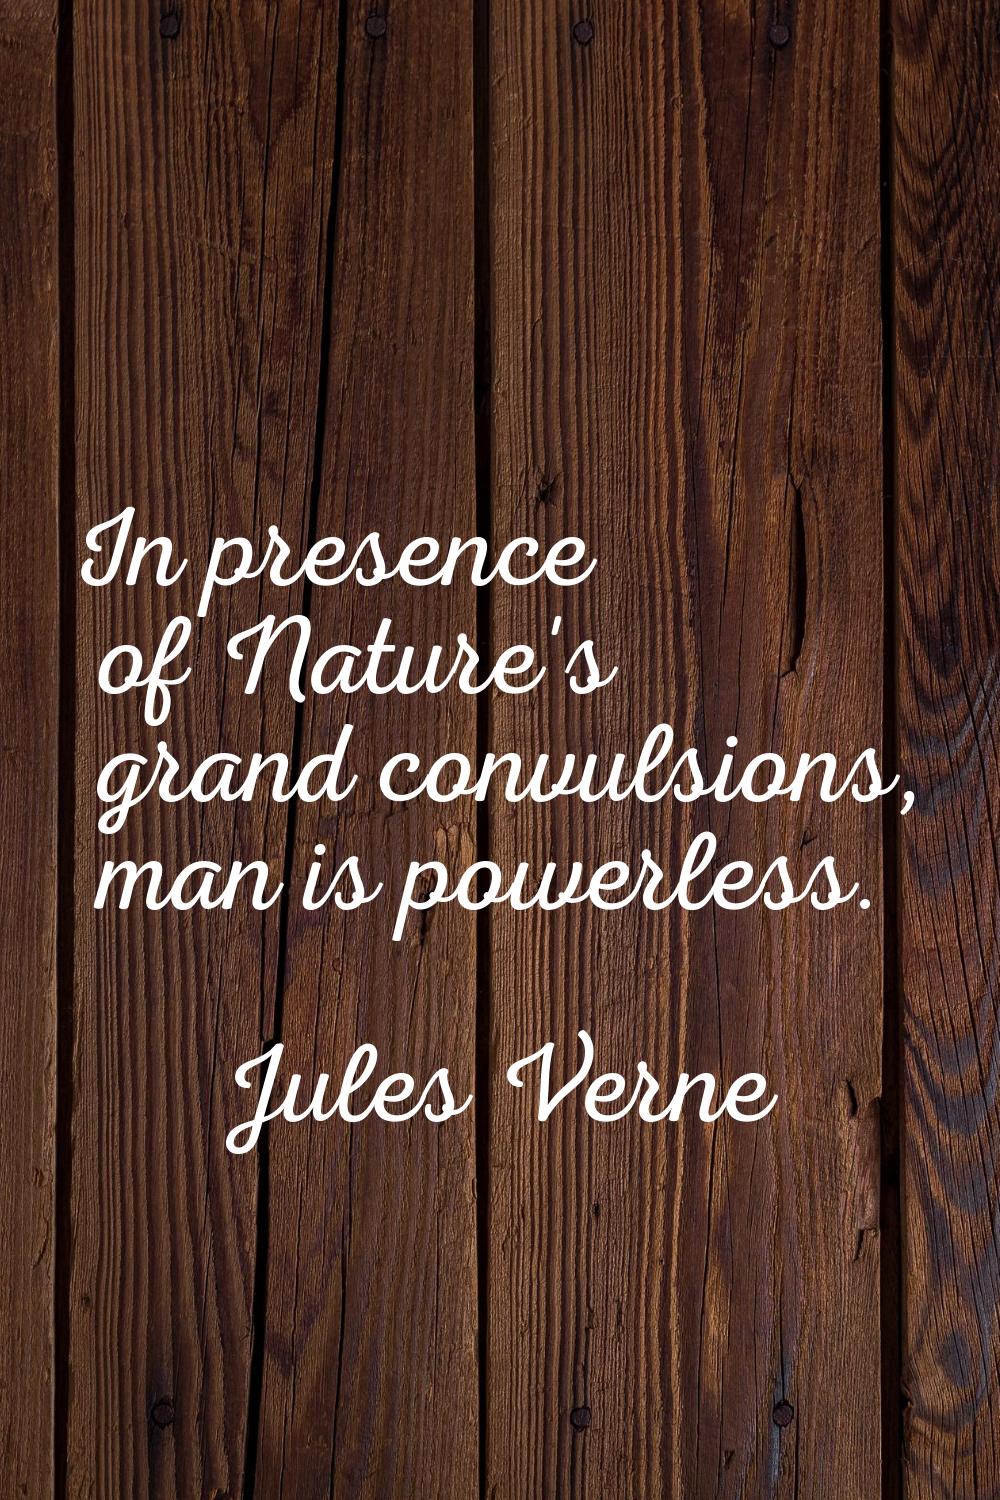 In presence of Nature's grand convulsions, man is powerless.